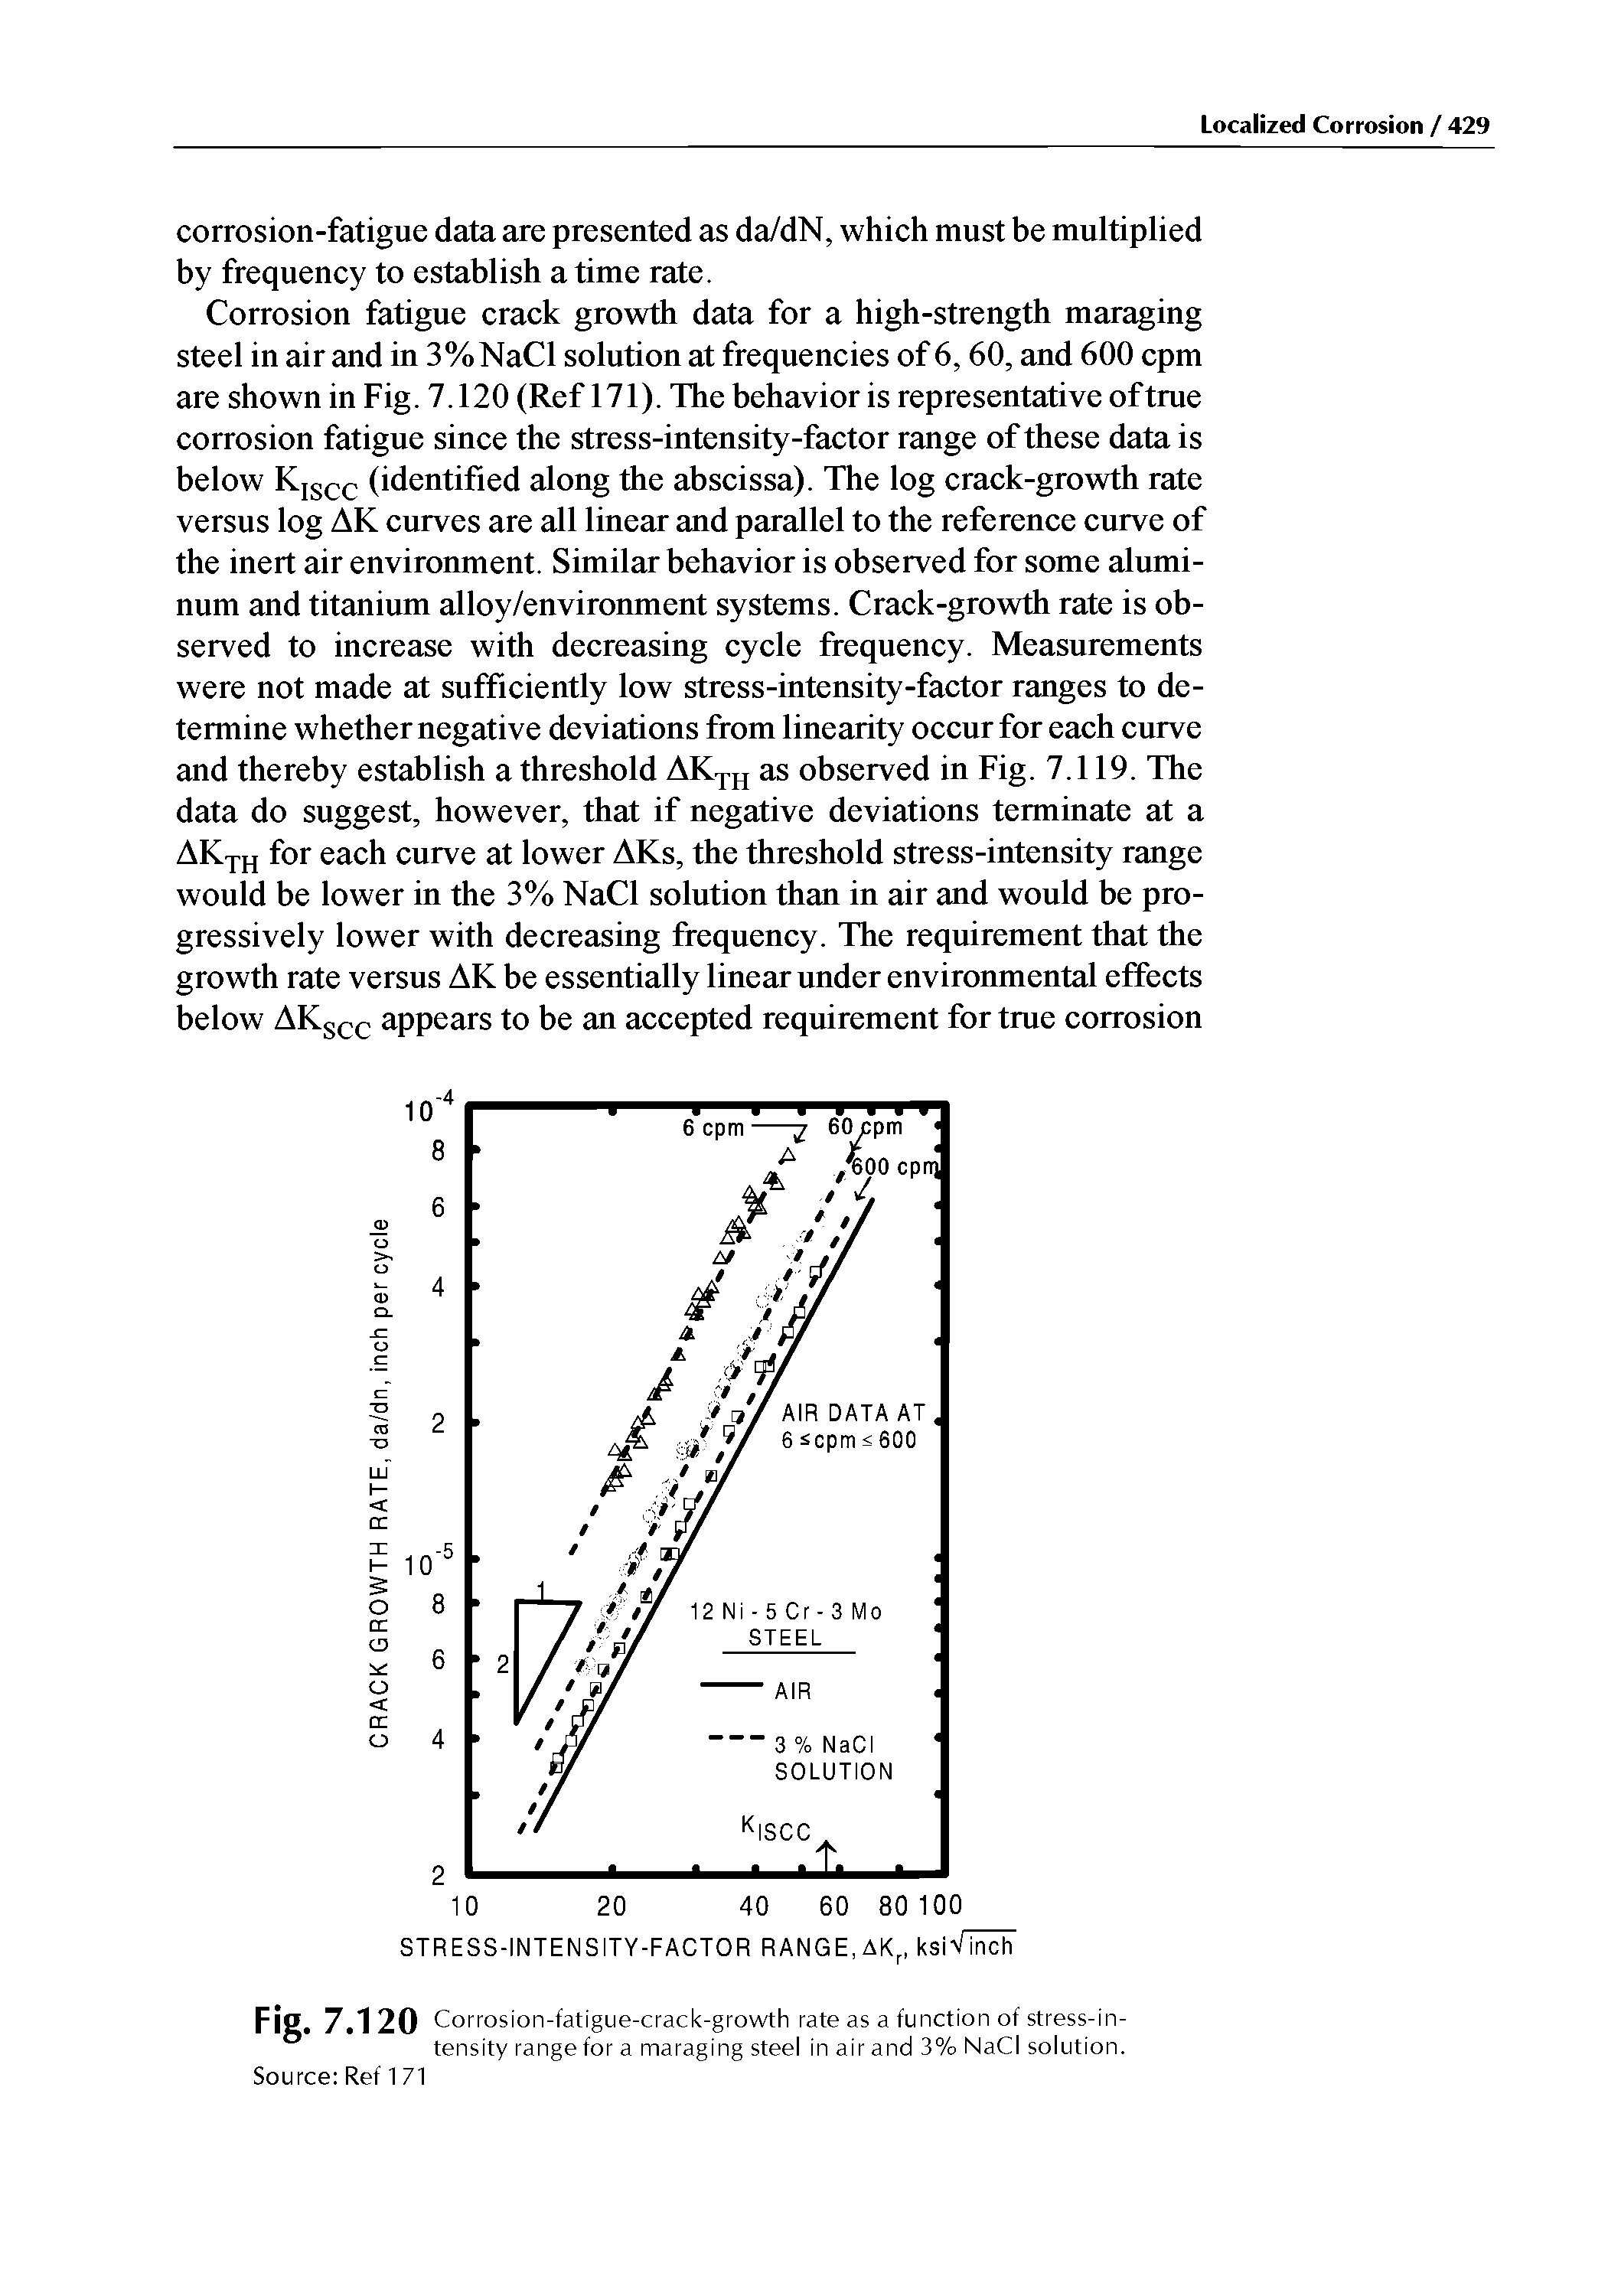 Fig. 7.120 Corrosion-fatigue-crack-growth rate as a function of stress-in-tensity range for a maraging steel in air and 3% NaCl solution.